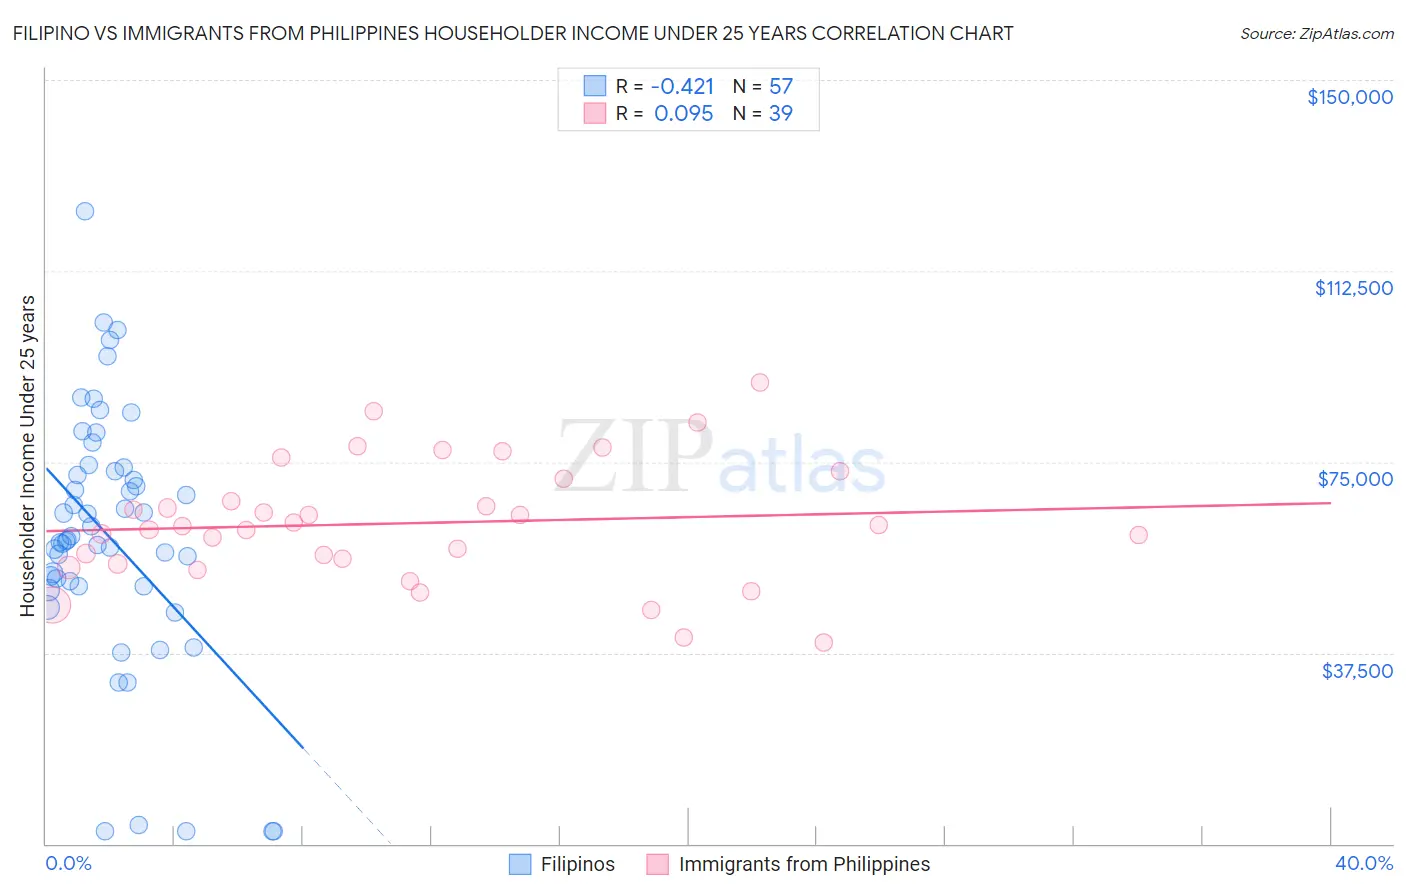 Filipino vs Immigrants from Philippines Householder Income Under 25 years